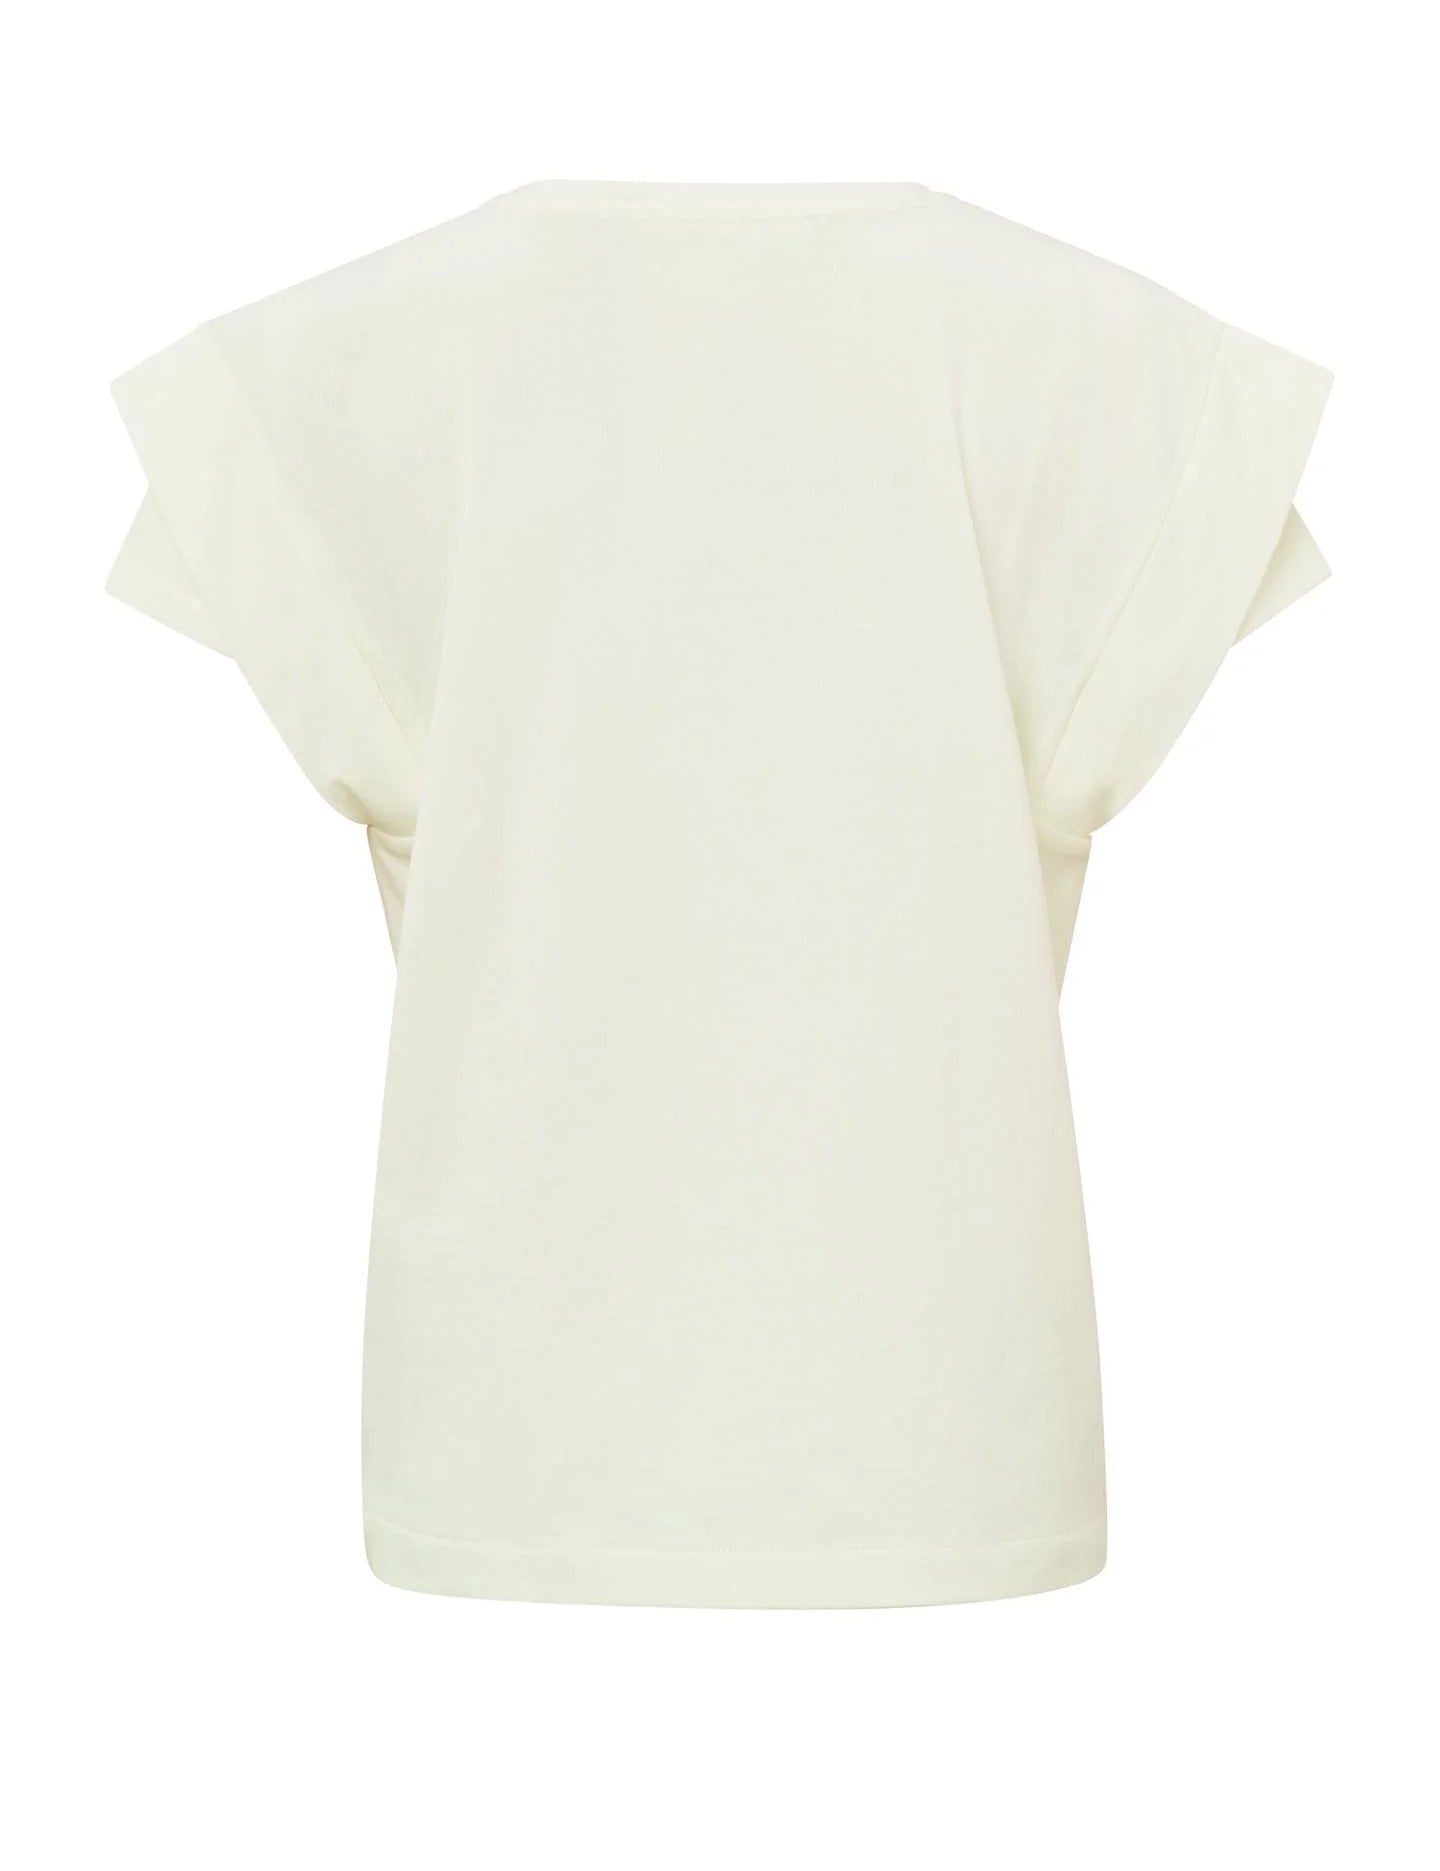 top-with-v-neck-and-double-short-sleeves-in-regular-fit-ivory-white_2880x_jpg.jpg